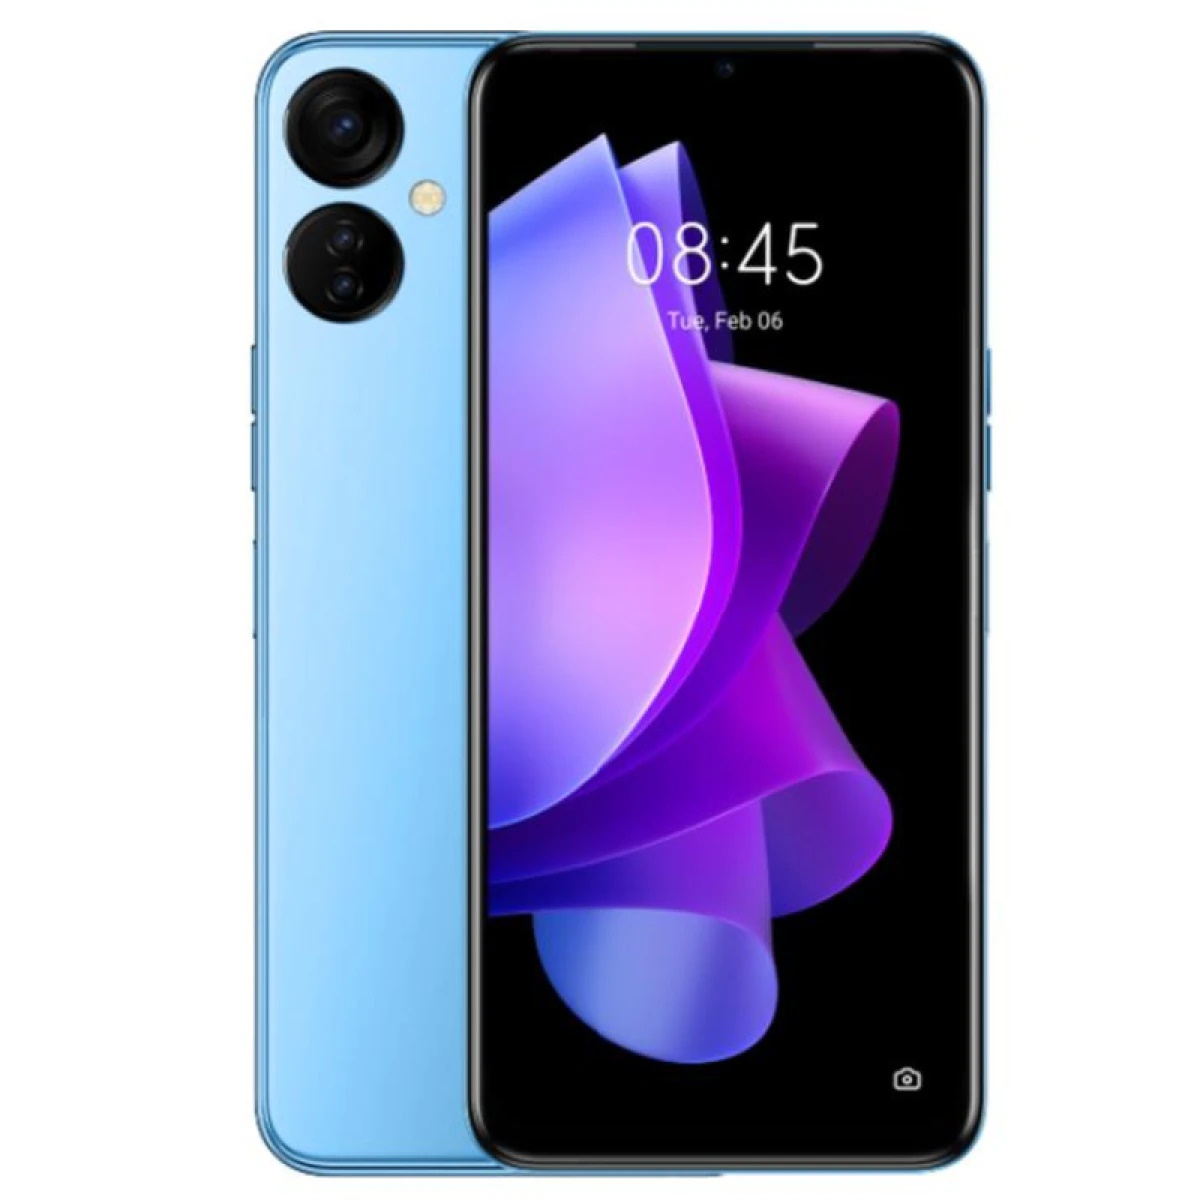 Tecno Spark 9T (India) Released 2022, August 06, 8.9mm thickness, Android 11, HIOS 7.6, 64GB storage, microSDXC, 6.6"1080x2408 pixels, 50MP1080p, 4GB RAMHelio G35, 5000mAh18W